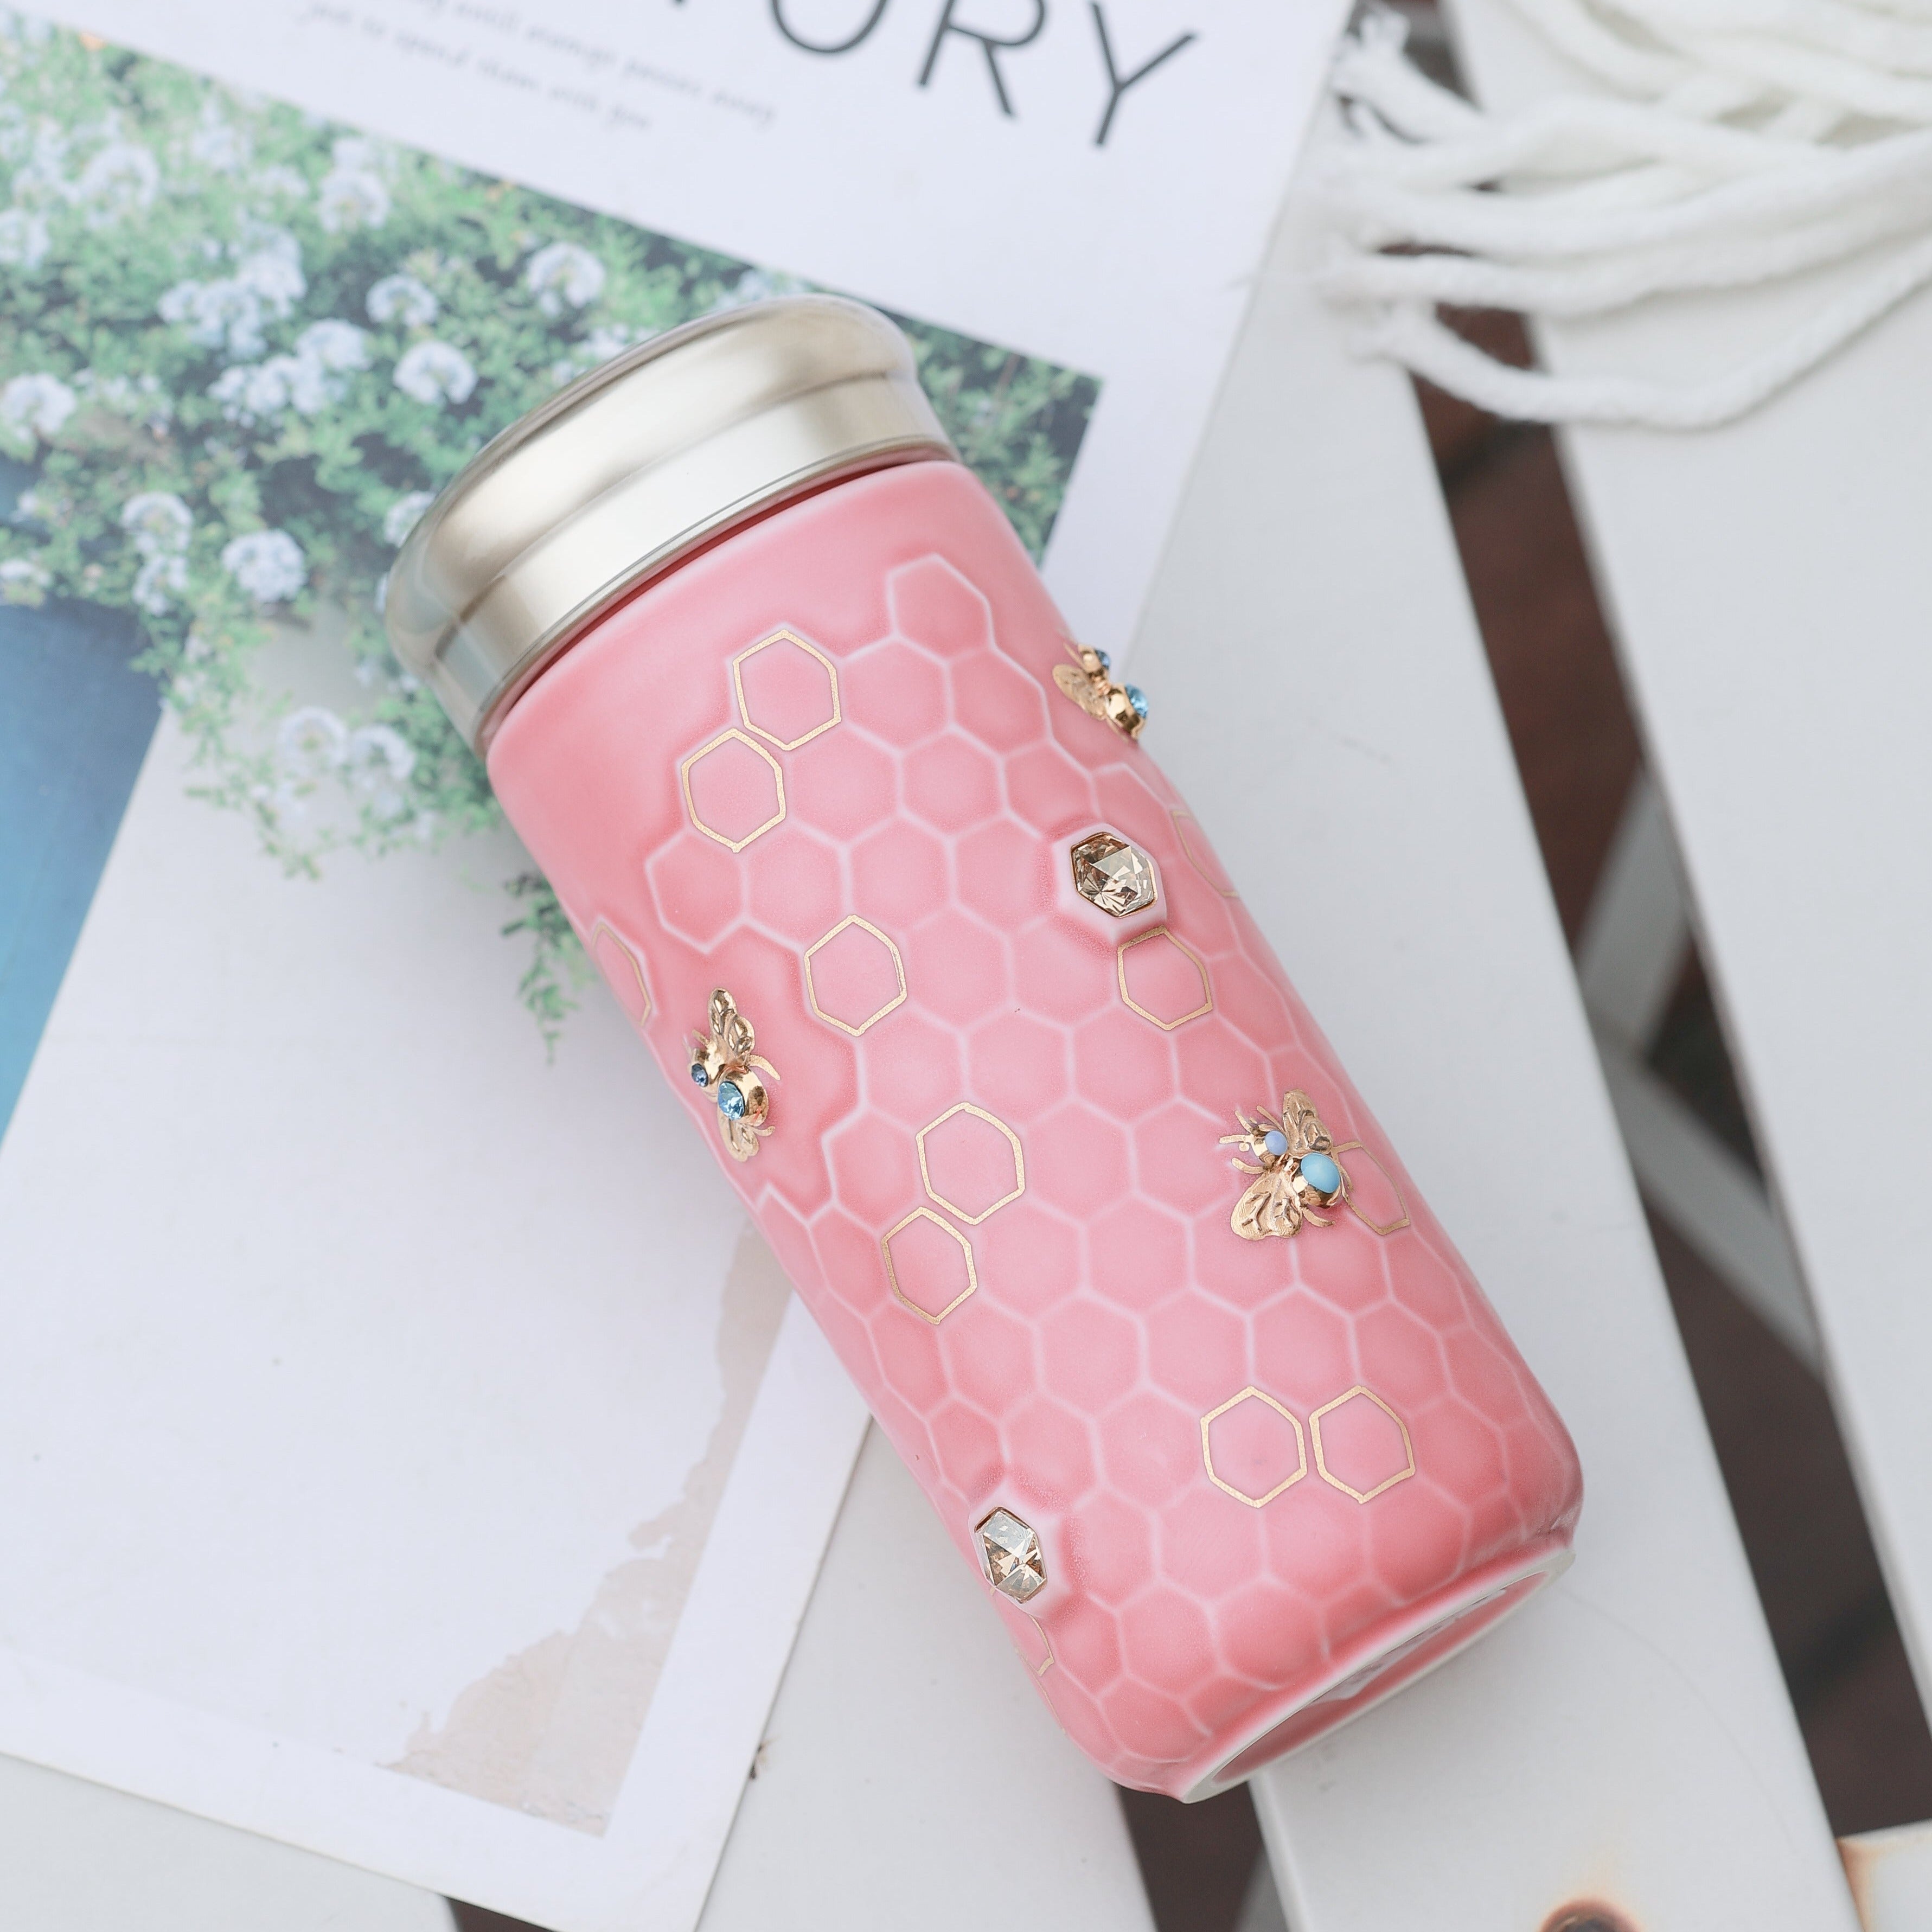 Crystal-studded ceramic travel container